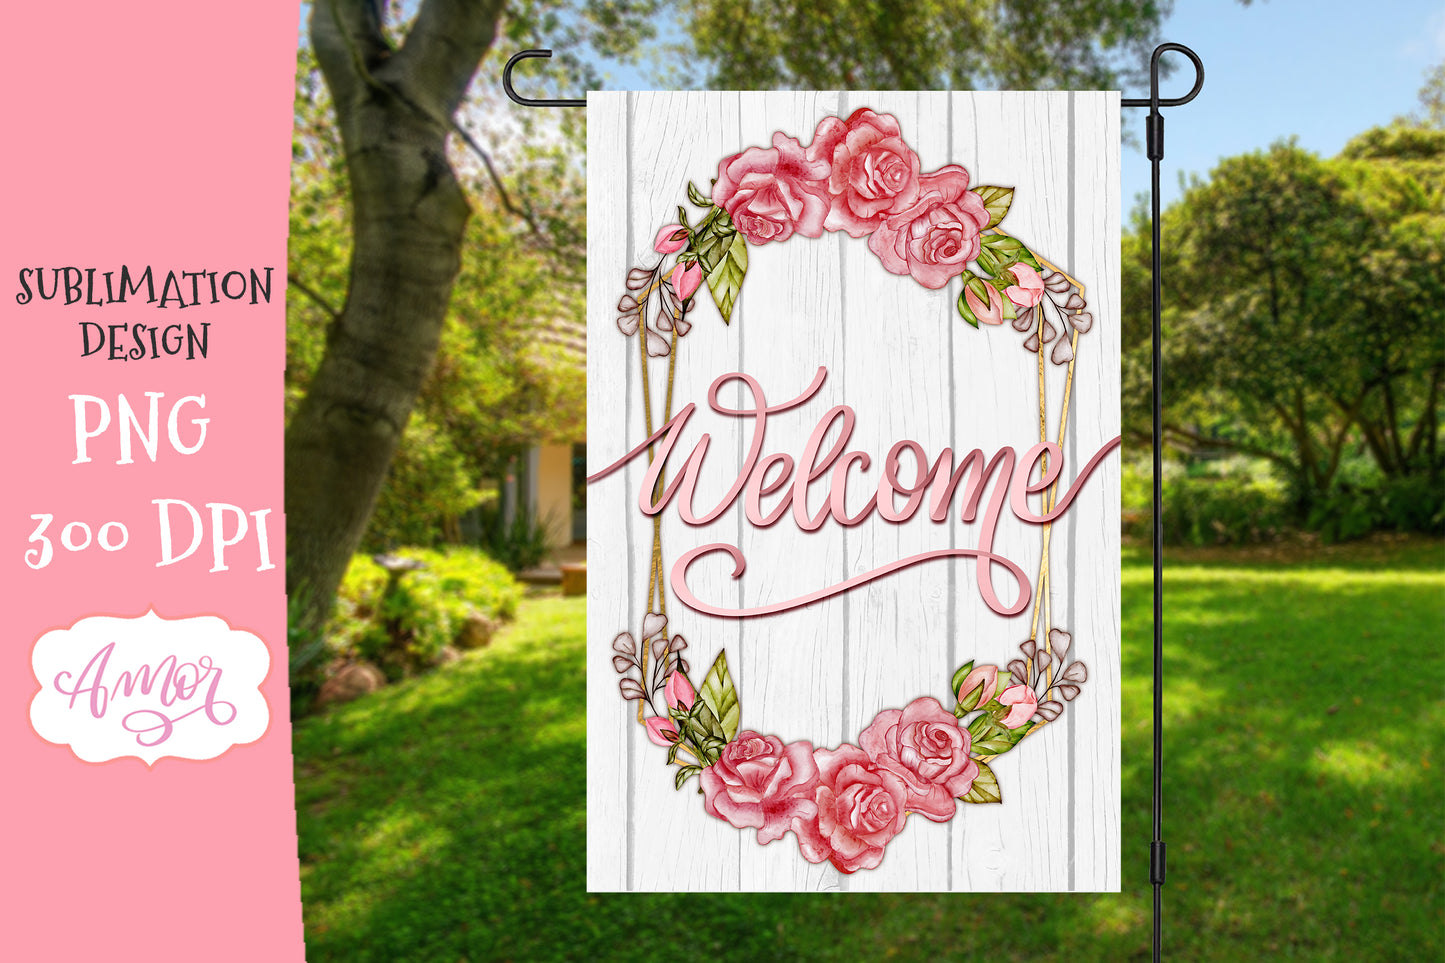 Welcome Garden Flag Sublimation Design with a floral wreath